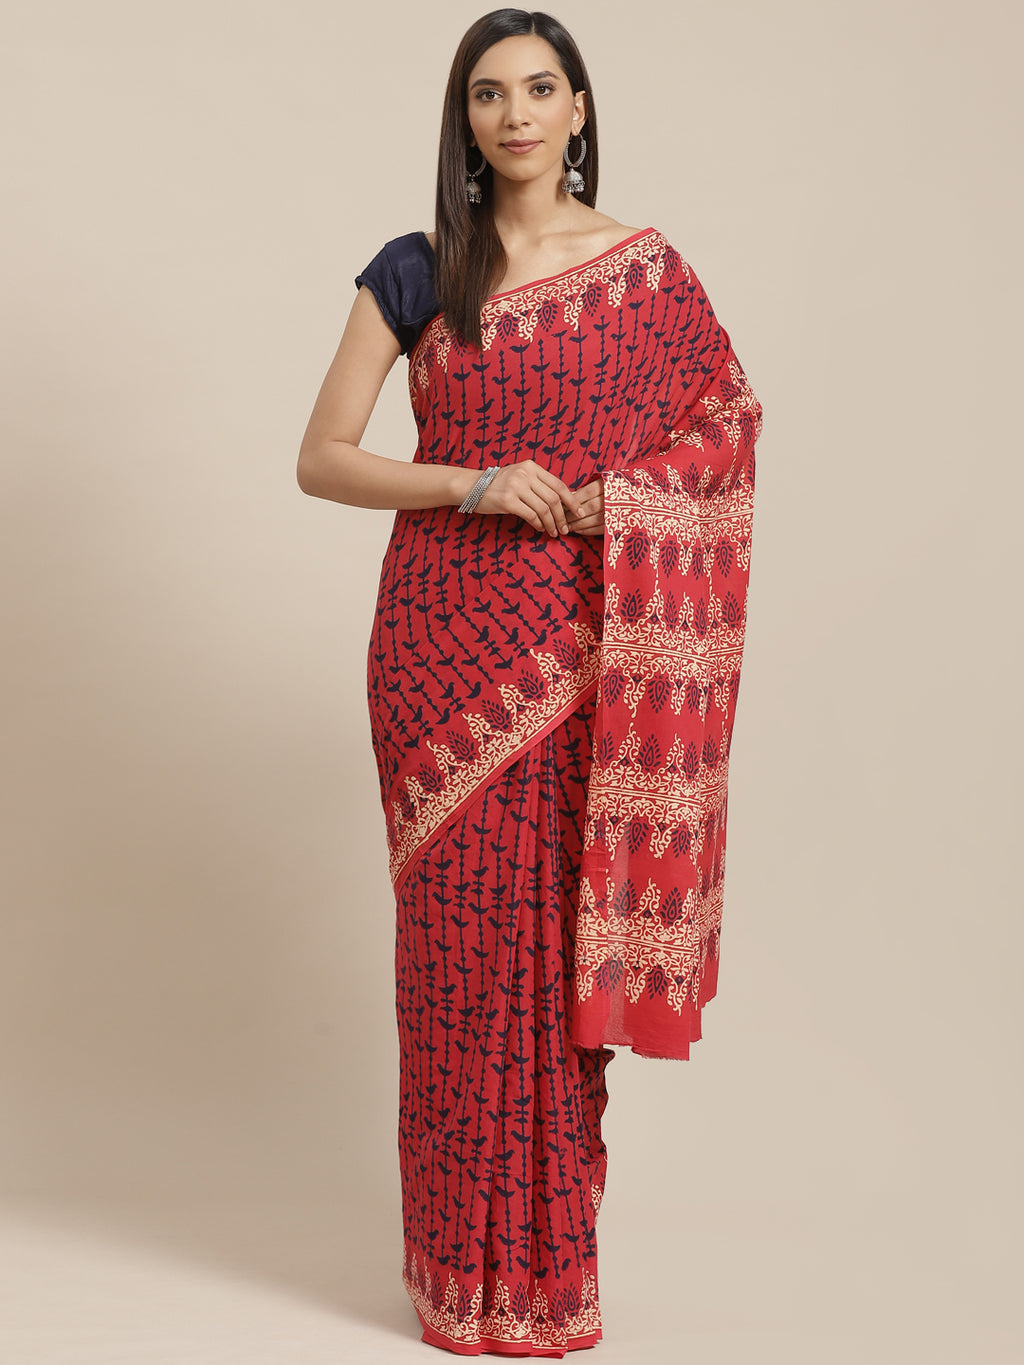 Red and Black, Kalakari India Pure Cotton Handblock Printed Saree and Blouse RCBGSA0021-Saree-Kalakari India-RCBGSA0021-Cotton, Geographical Indication, Hand Block, Hand Crafted, Heritage Prints, Natural Dyes, Red, Sarees, Sustainable Fabrics, Woven, Yellow-[Linen,Ethnic,wear,Fashionista,Handloom,Handicraft,Indigo,blockprint,block,print,Cotton,Chanderi,Blue, latest,classy,party,bollywood,trendy,summer,style,traditional,formal,elegant,unique,style,hand,block,print, dabu,booti,gift,present,glamoro